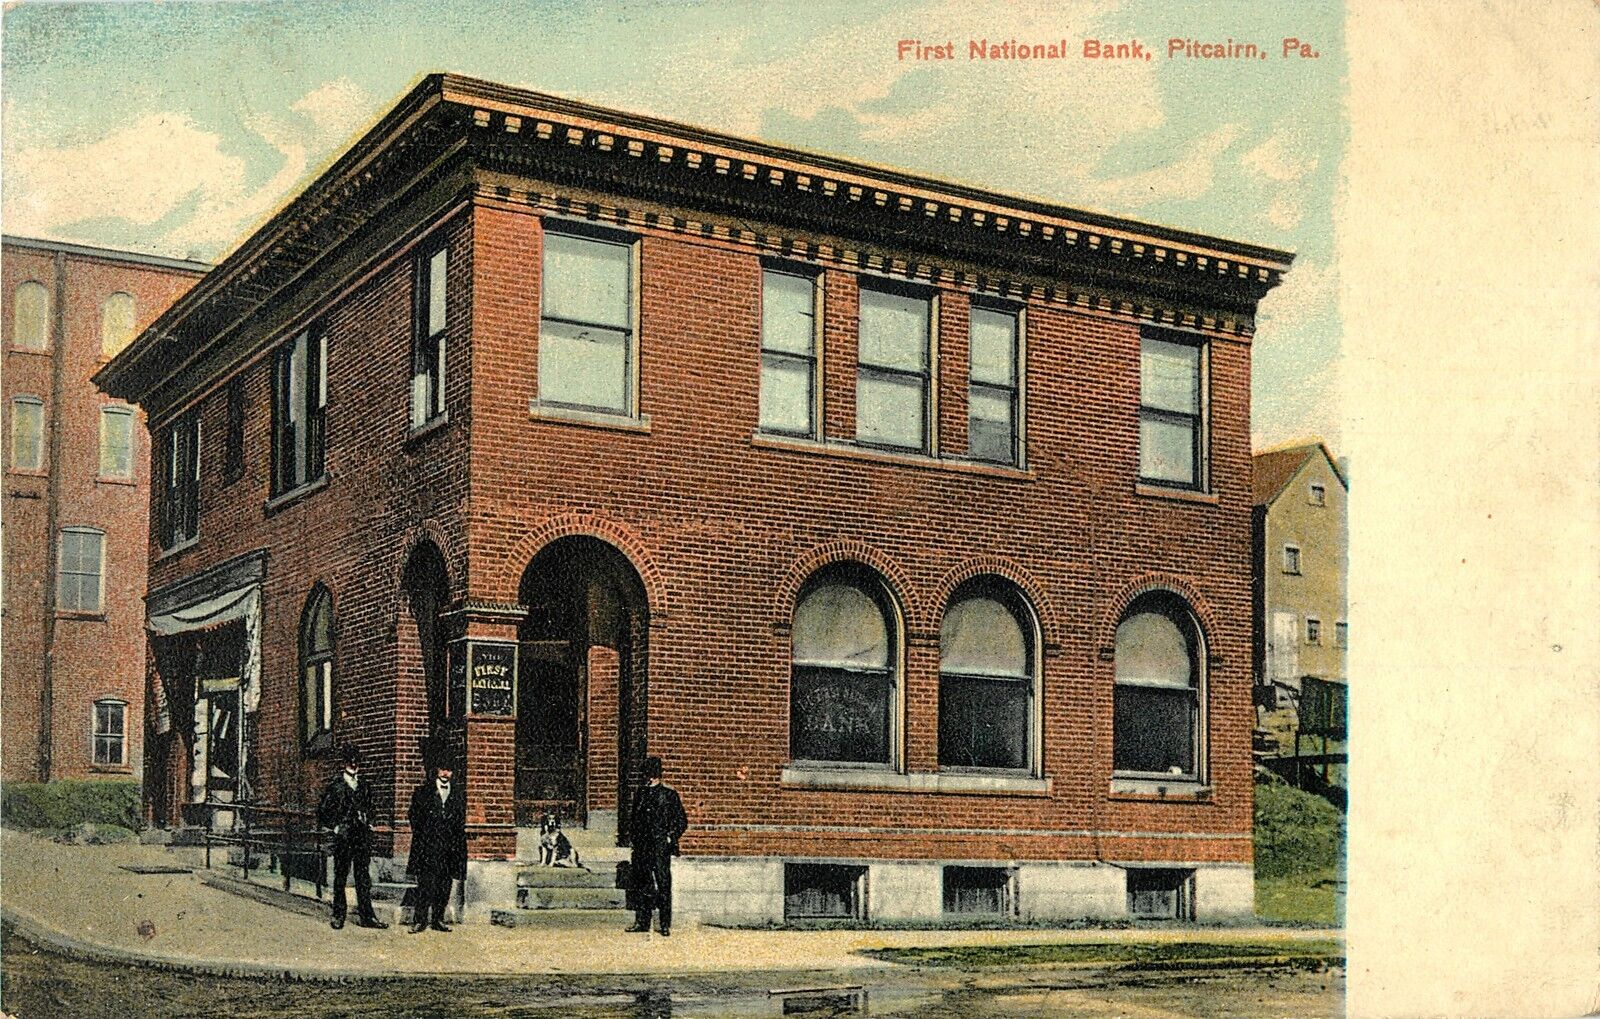 3 Bank Officers & Their Dog Outside the First National Bank, Pitcairn PA 1909